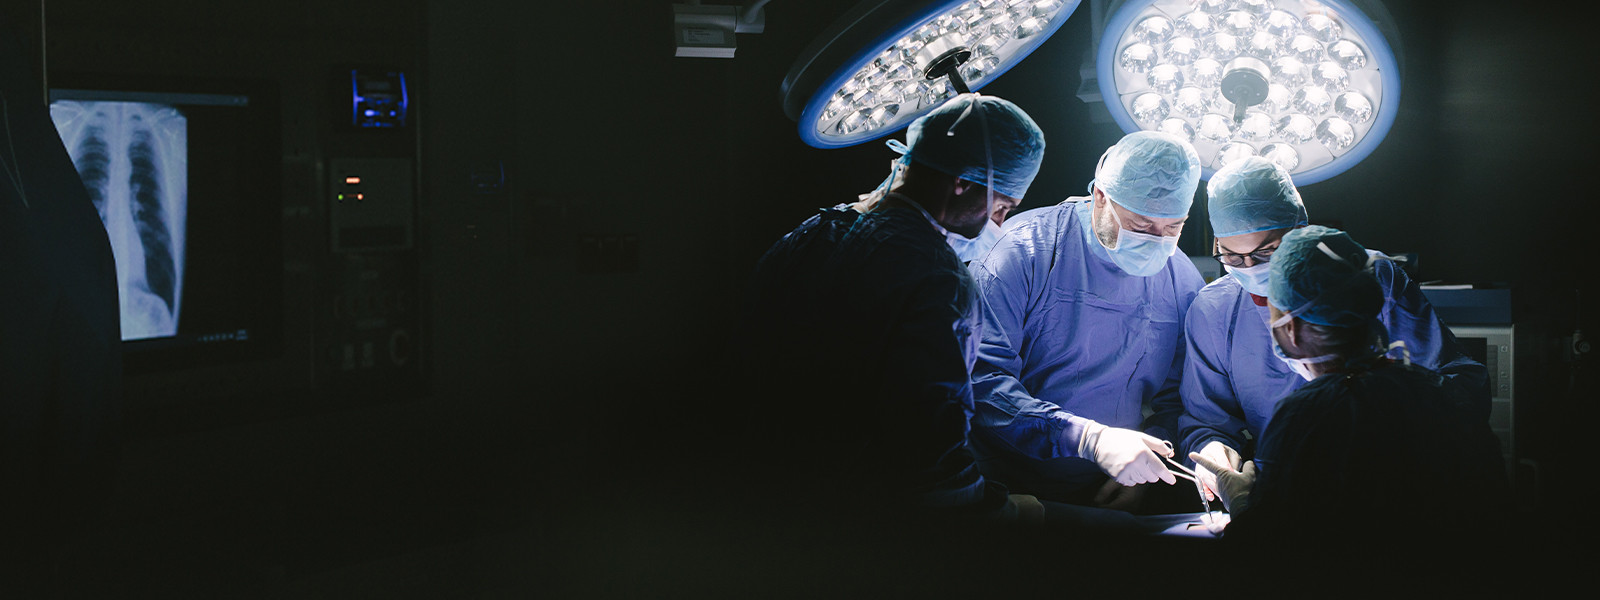 surgeons working in an OR